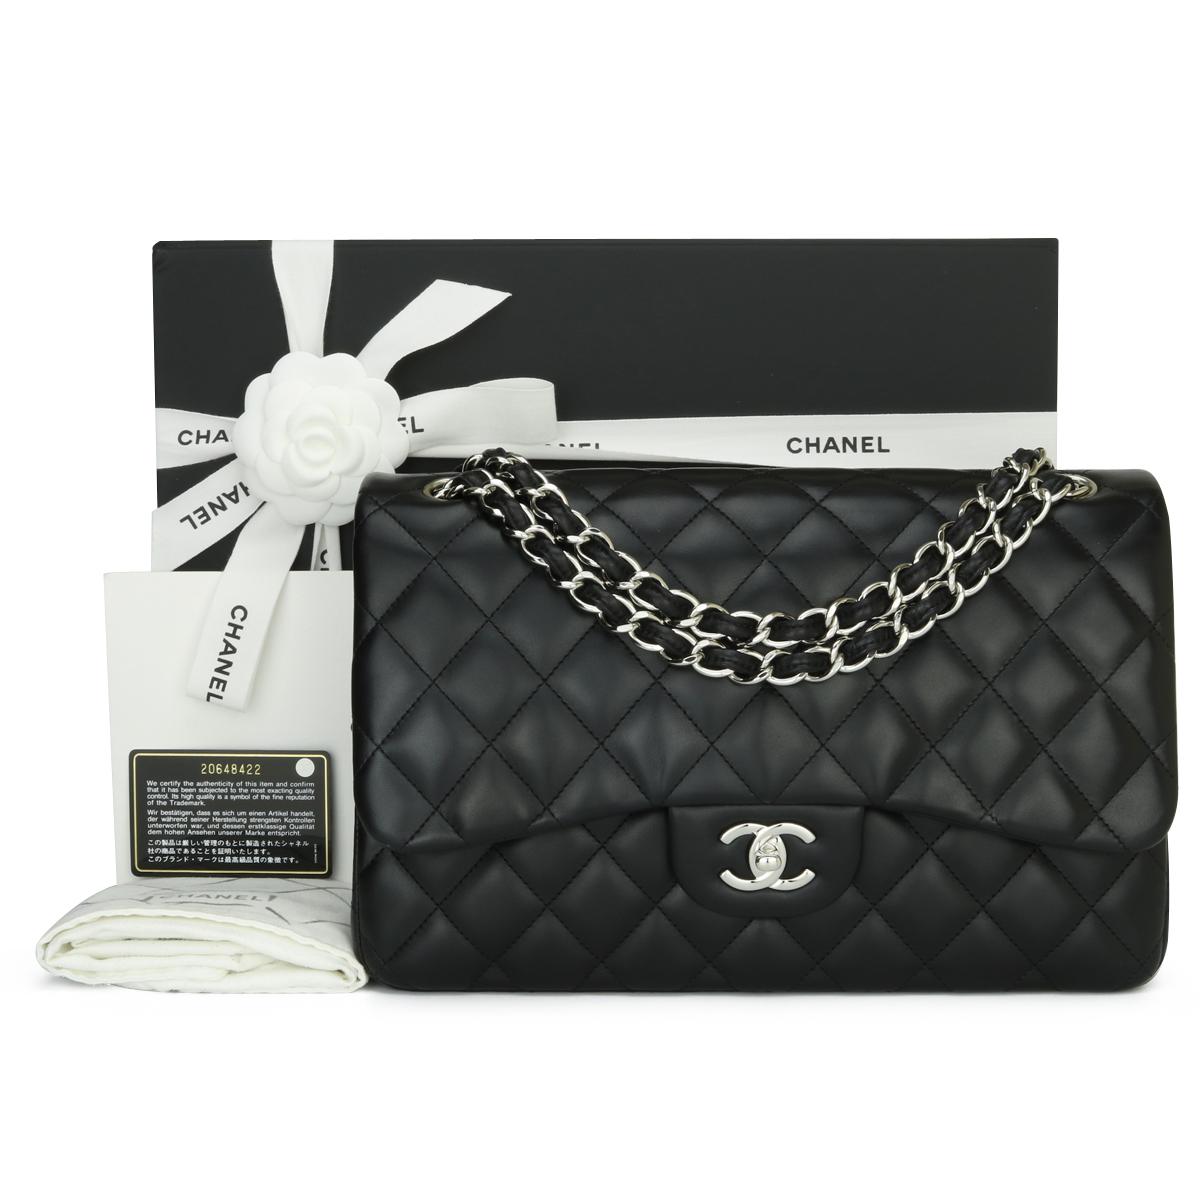 CHANEL Classic Double Flap Jumbo Bag Black Lambskin with Silver Hardware 2015.

This stunning bag is in excellent condition, the bag still holds its original shape, and the hardware is still very shiny. 

- Exterior Condition: Excellent condition.